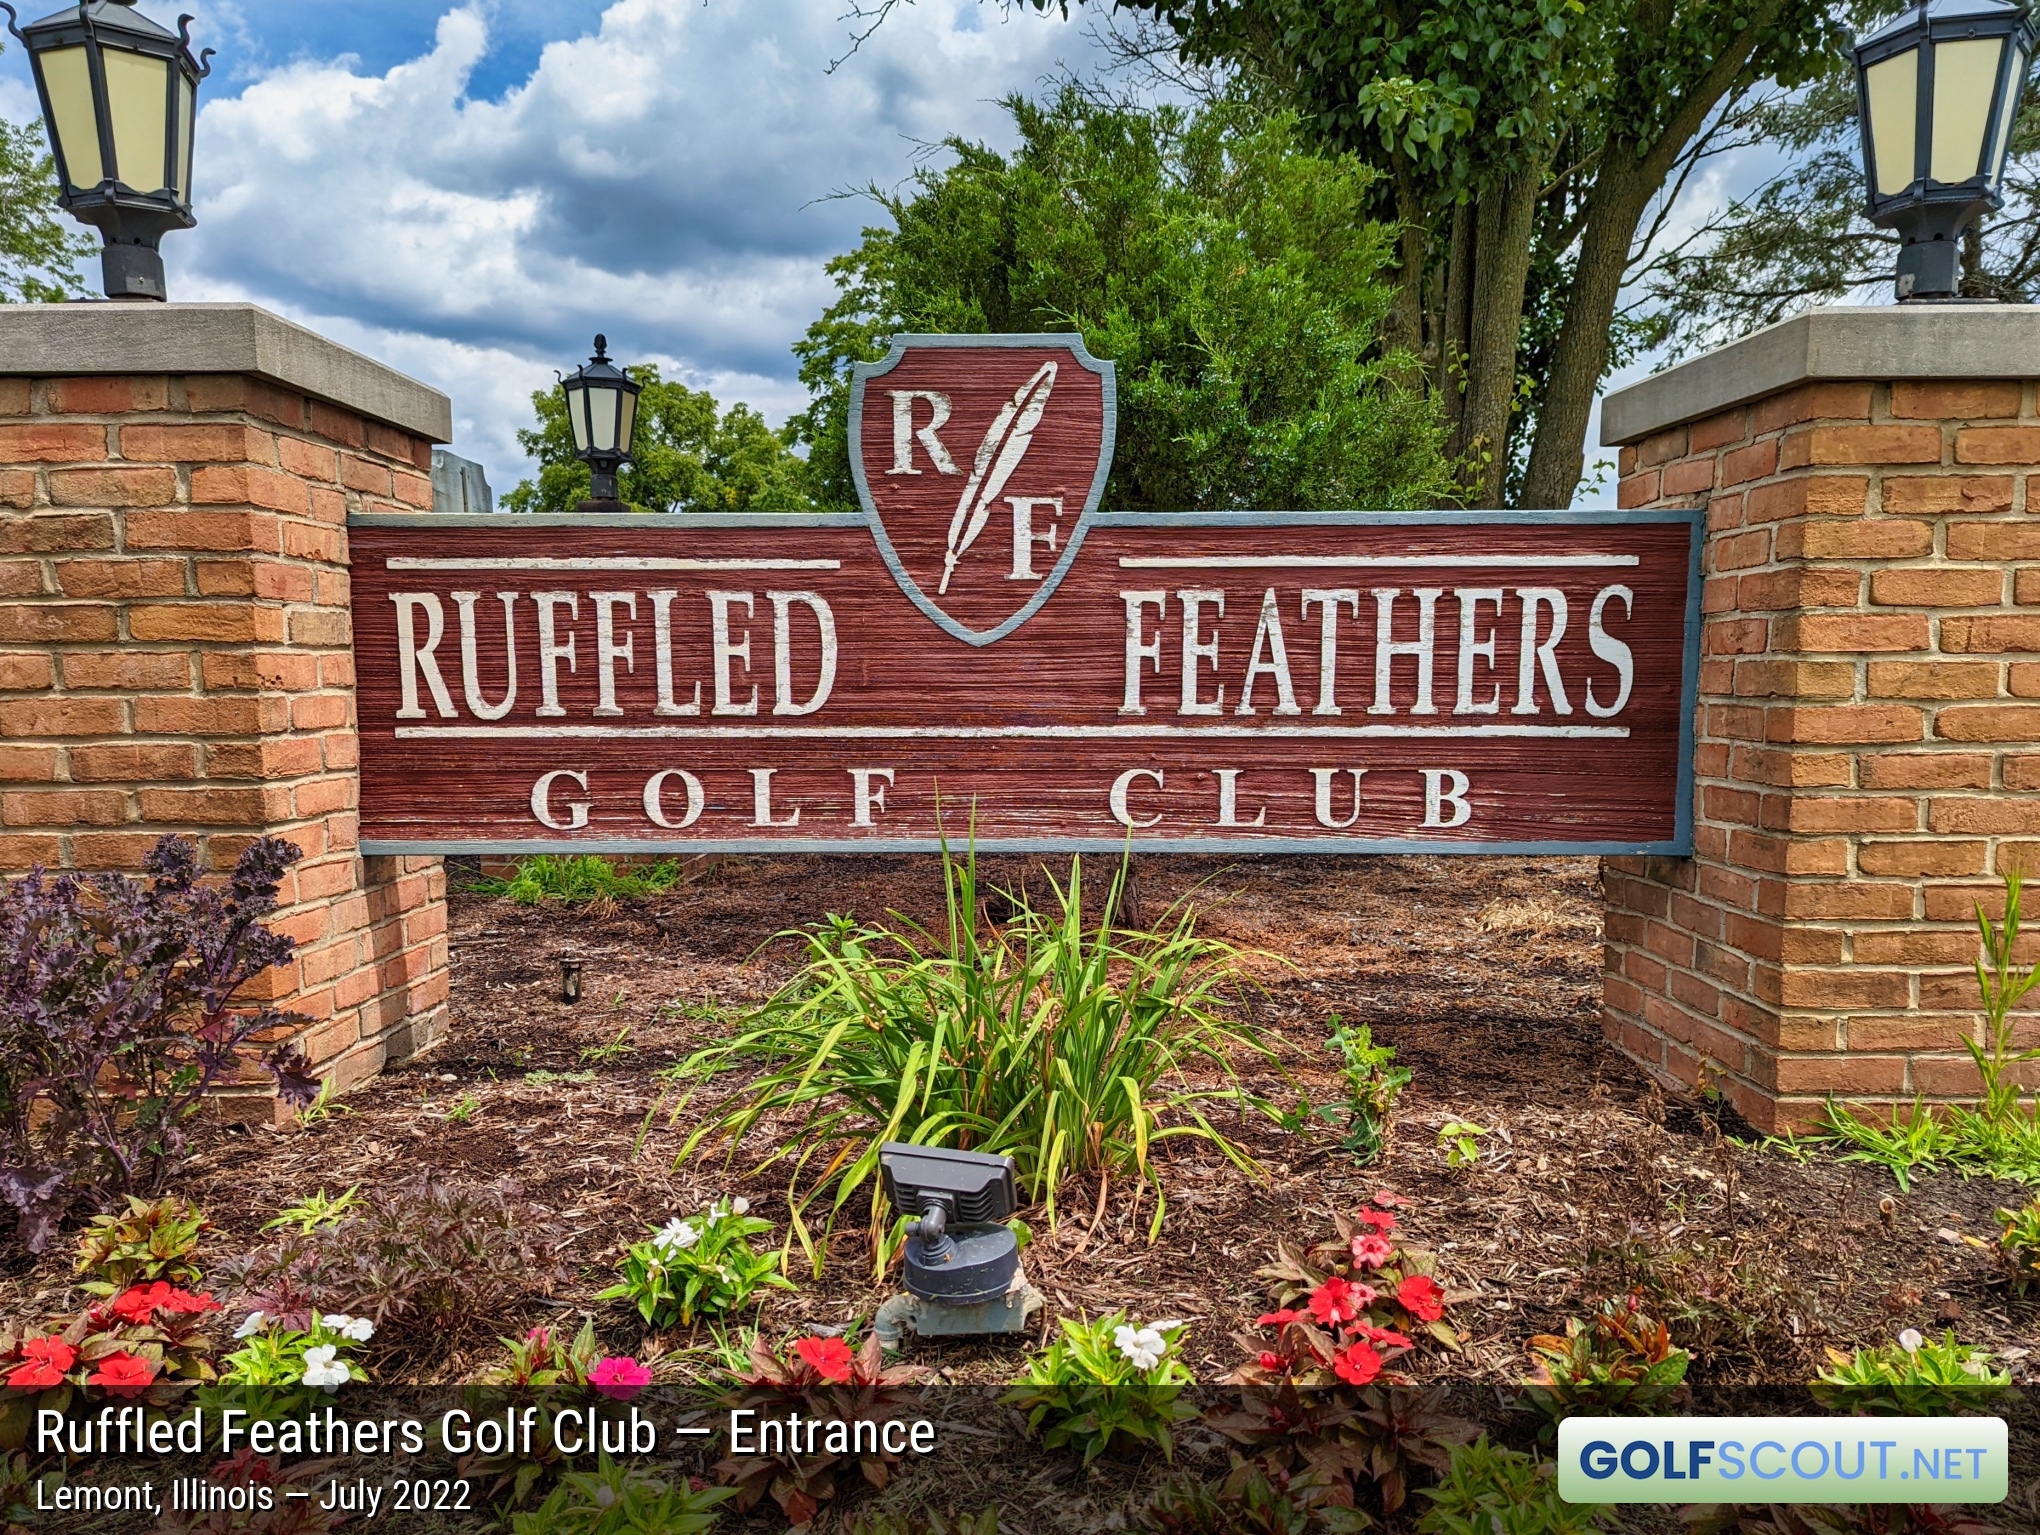 Sign at the entrance to Ruffled Feathers Golf Club